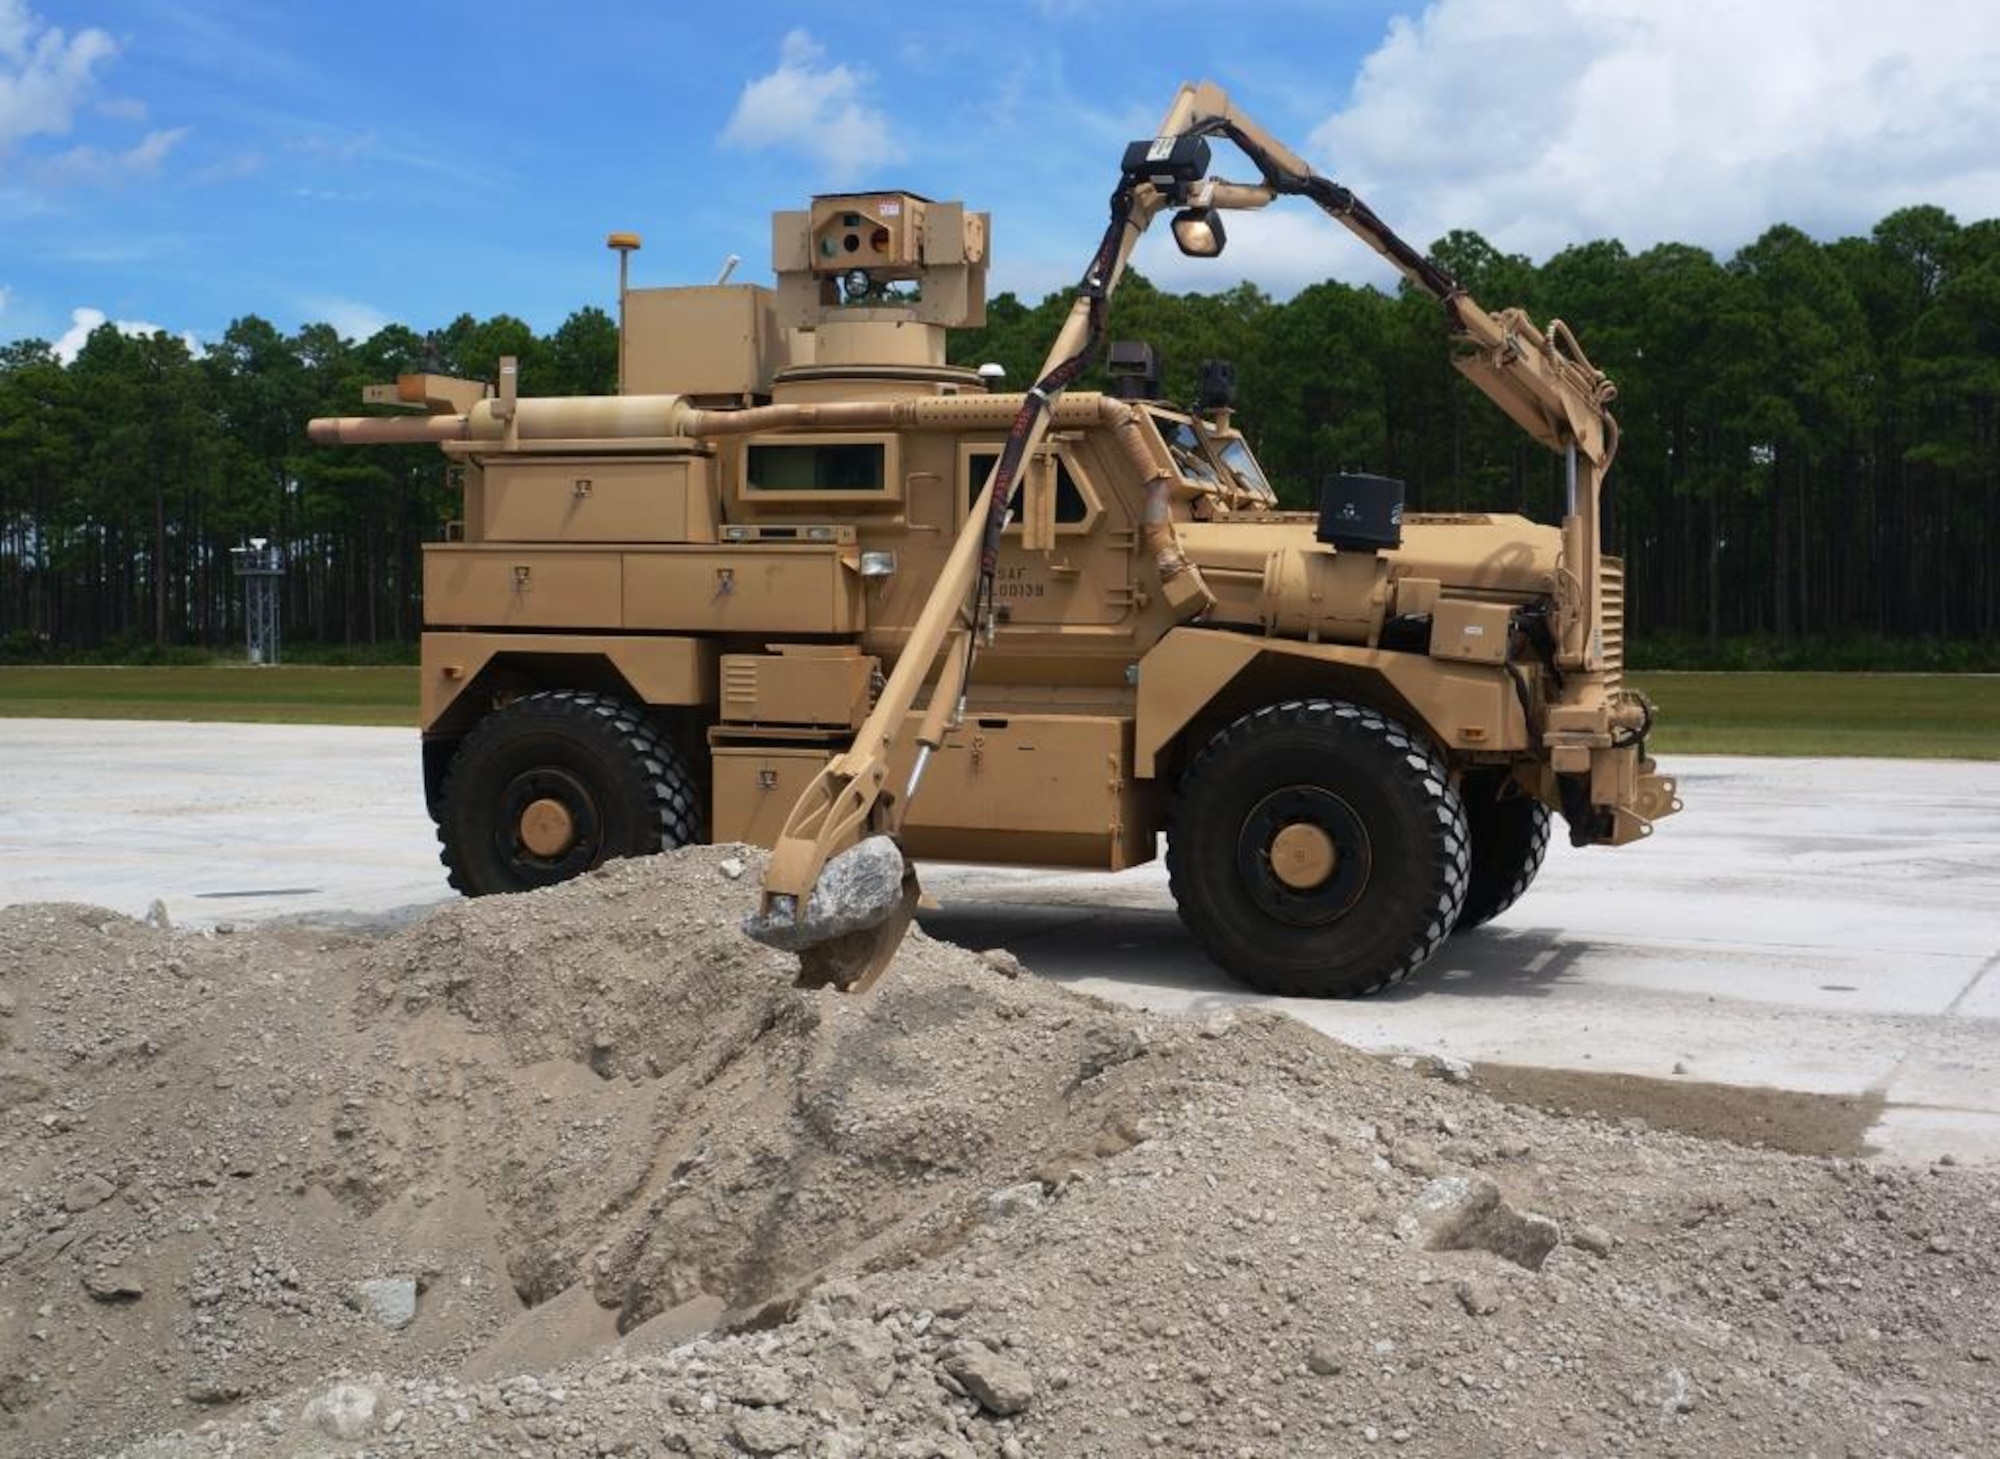 A Recovery of Airbase Denied By Ordnance (RADBO) vehicle, uses a robotic arm to investigate craters or areas where an unexploded device may be located. (Courtesy photo)